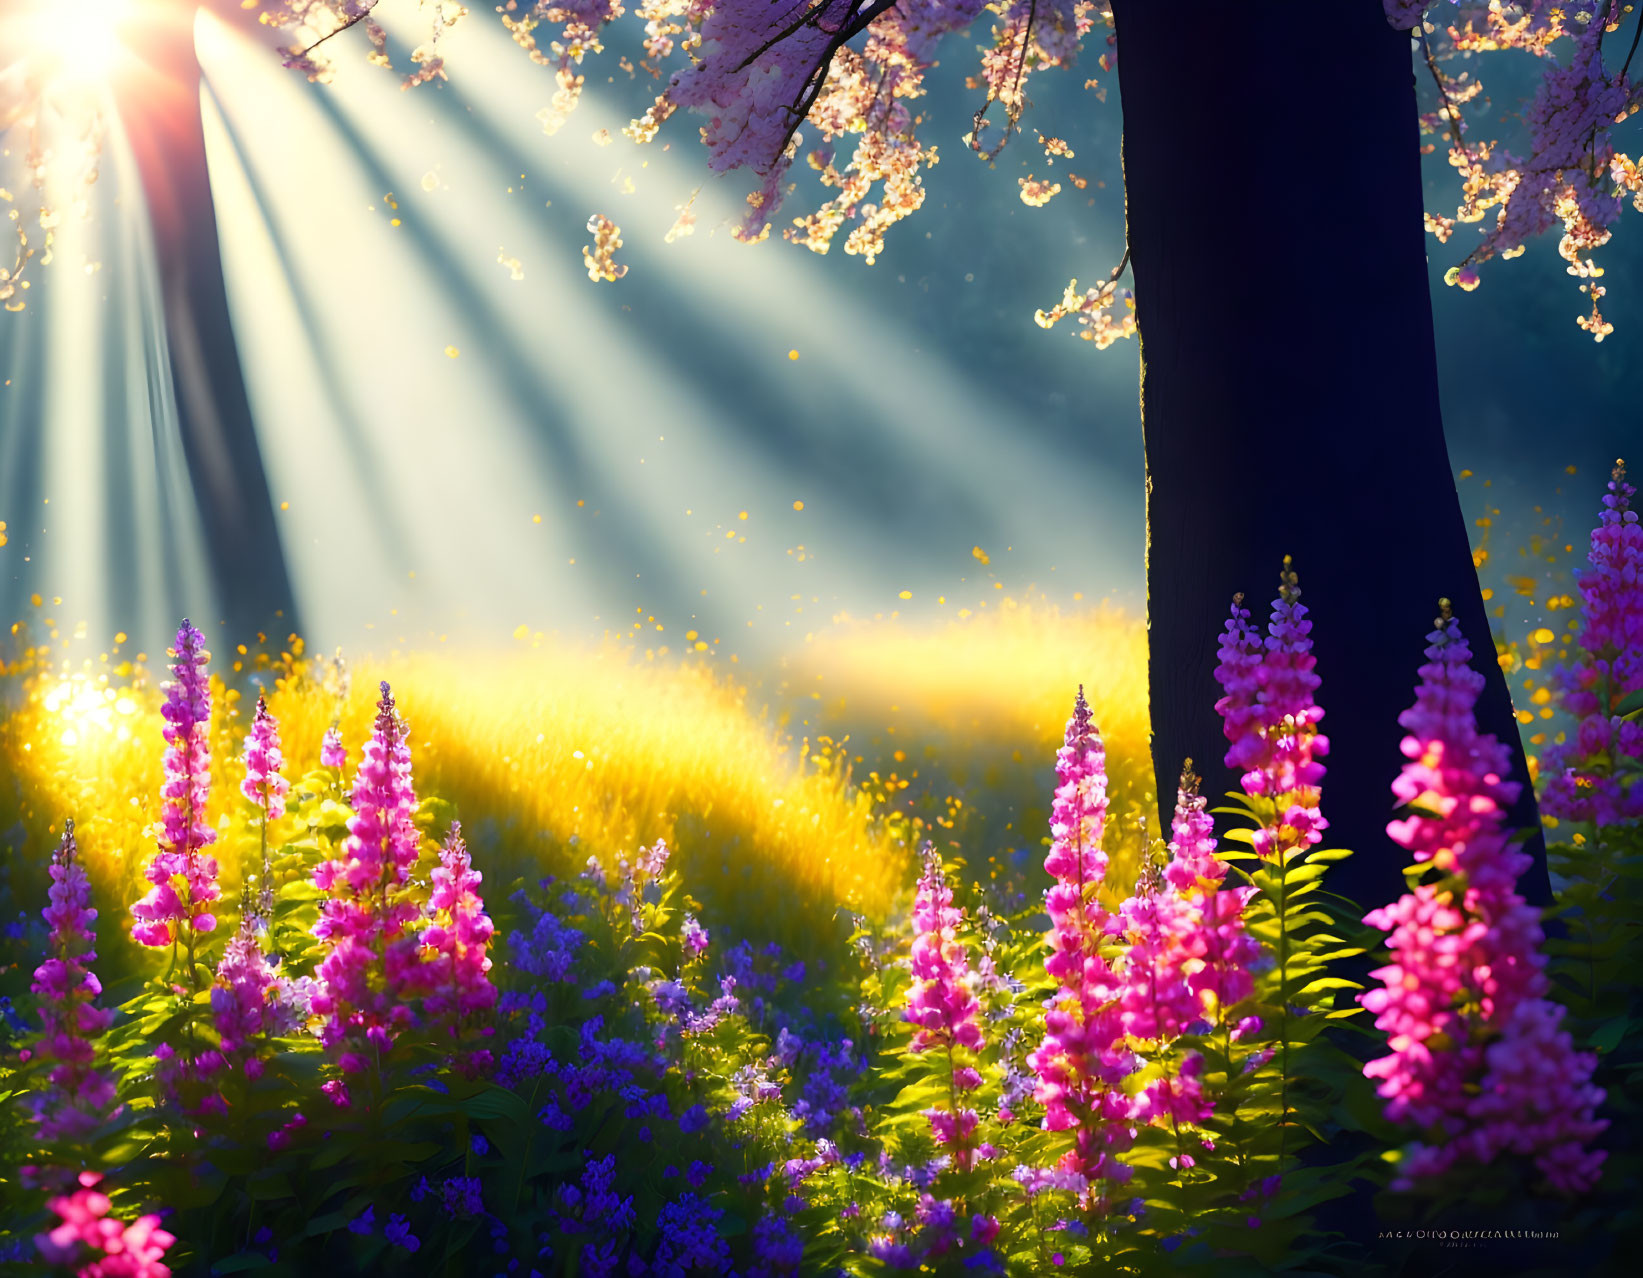 Sunlight through tree onto vibrant purple flower field in enchanted forest